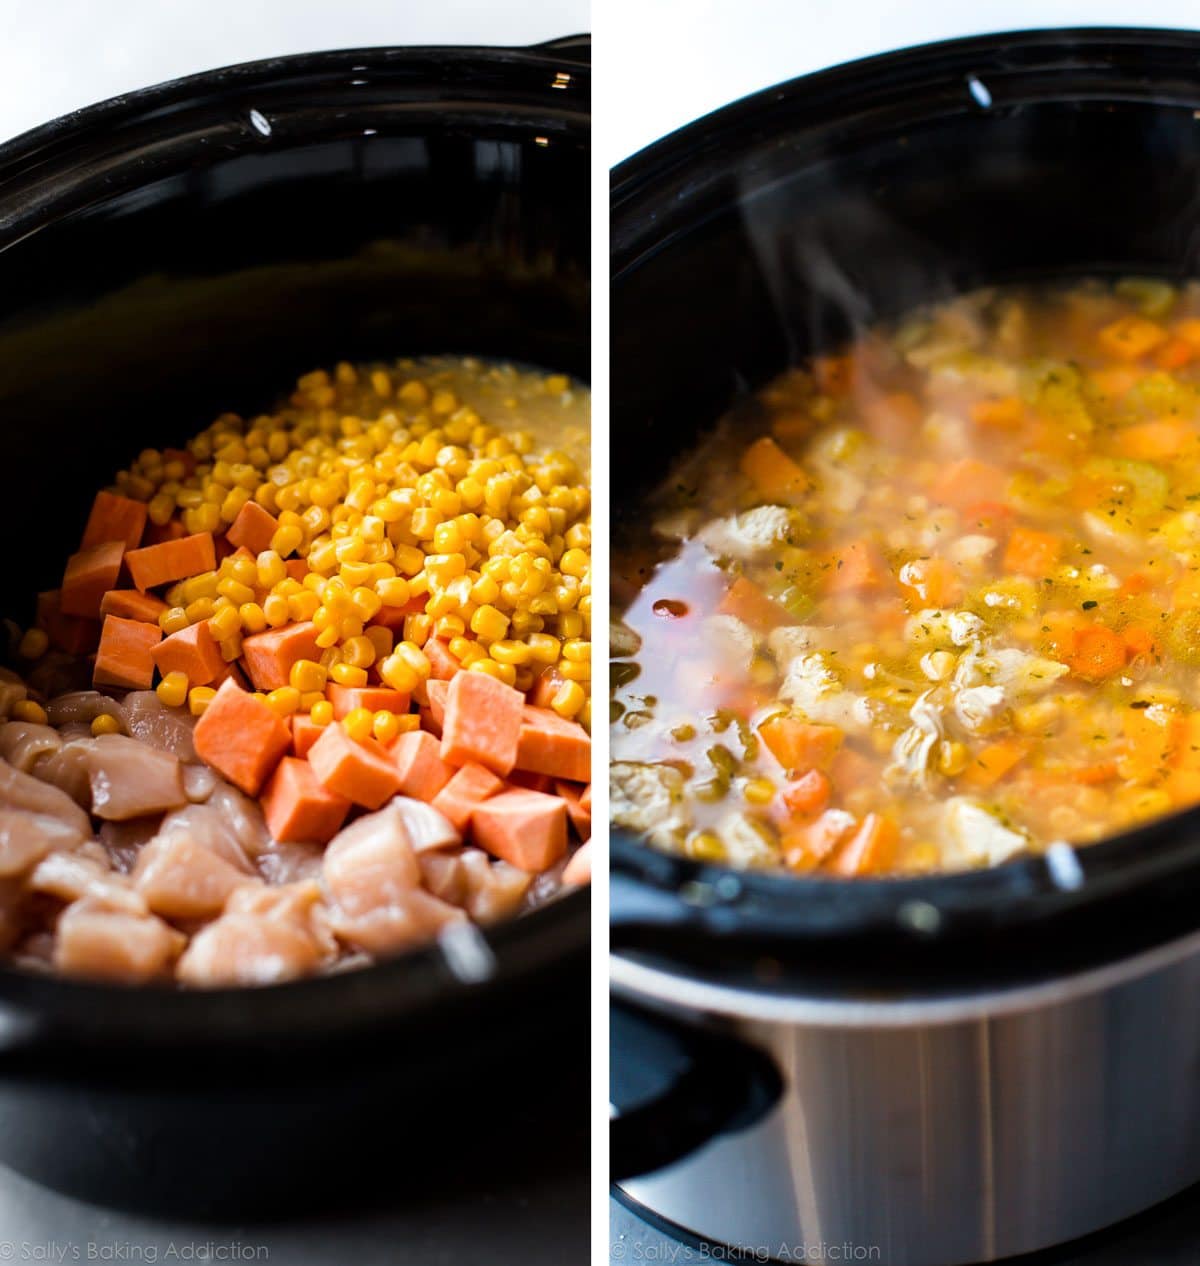 2 images of ingredients in a slow cooker before cooking and chowder in the slow cooker